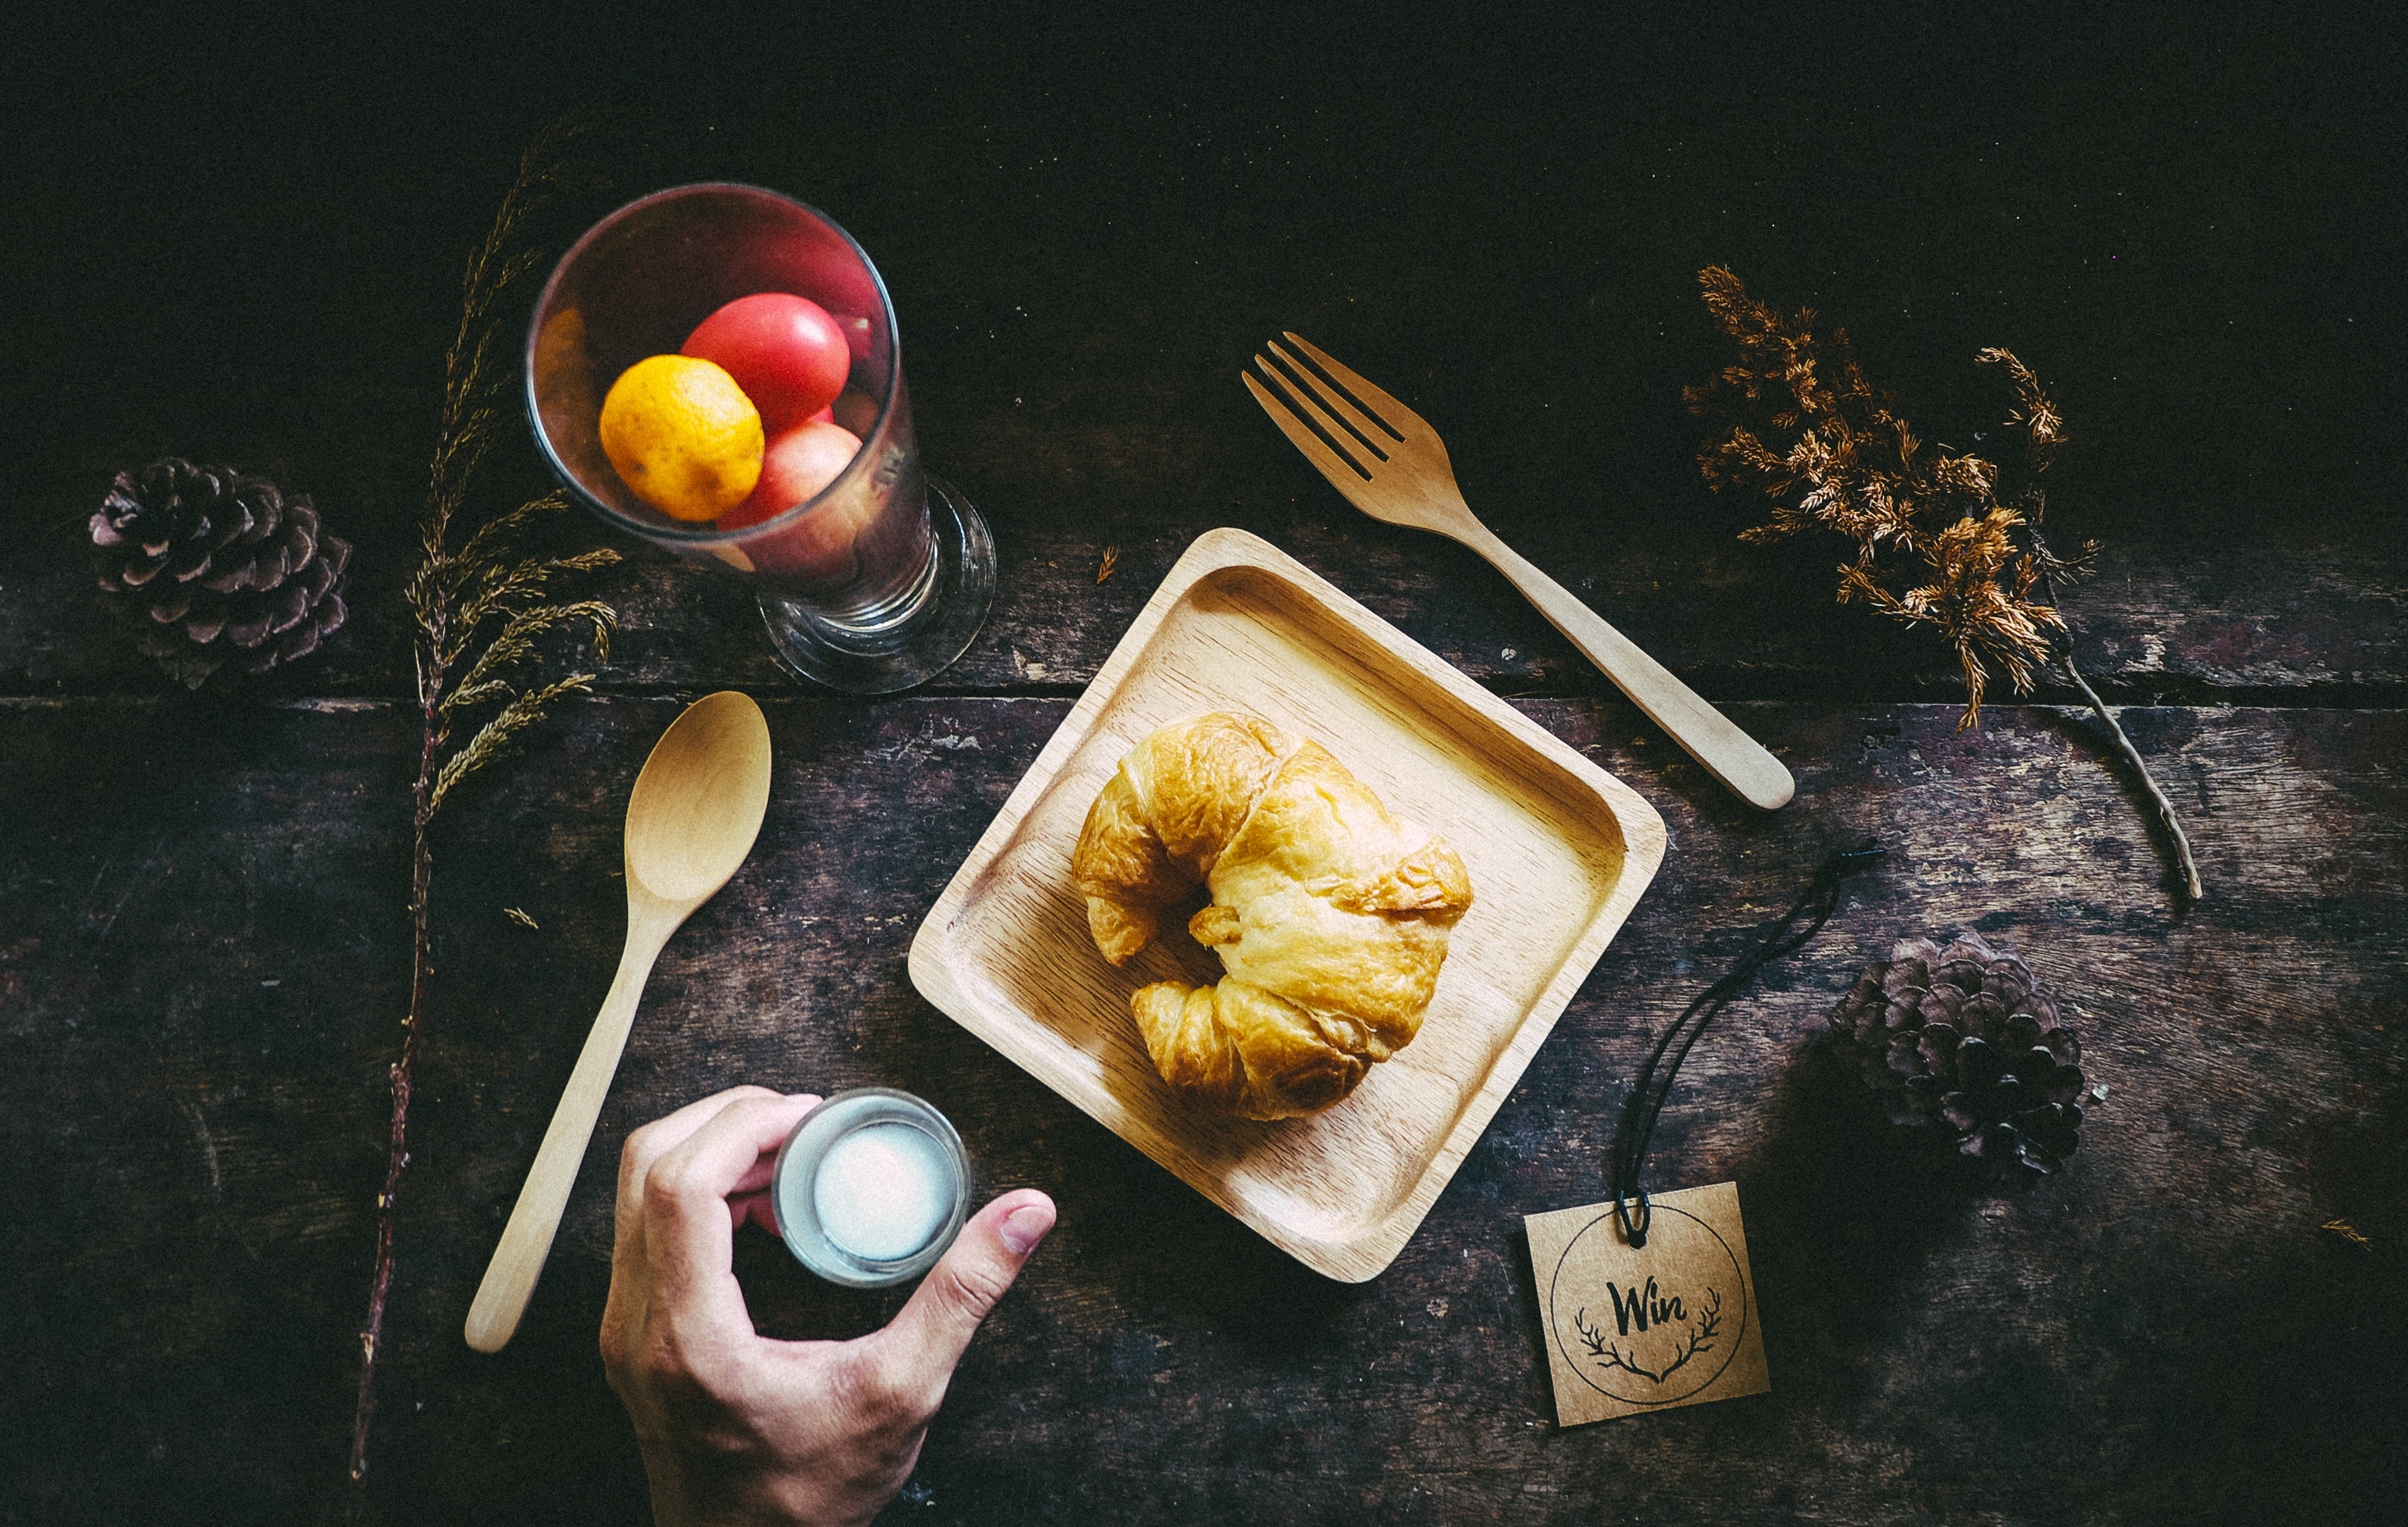 person holding gray tool with croissant and spoon and fork